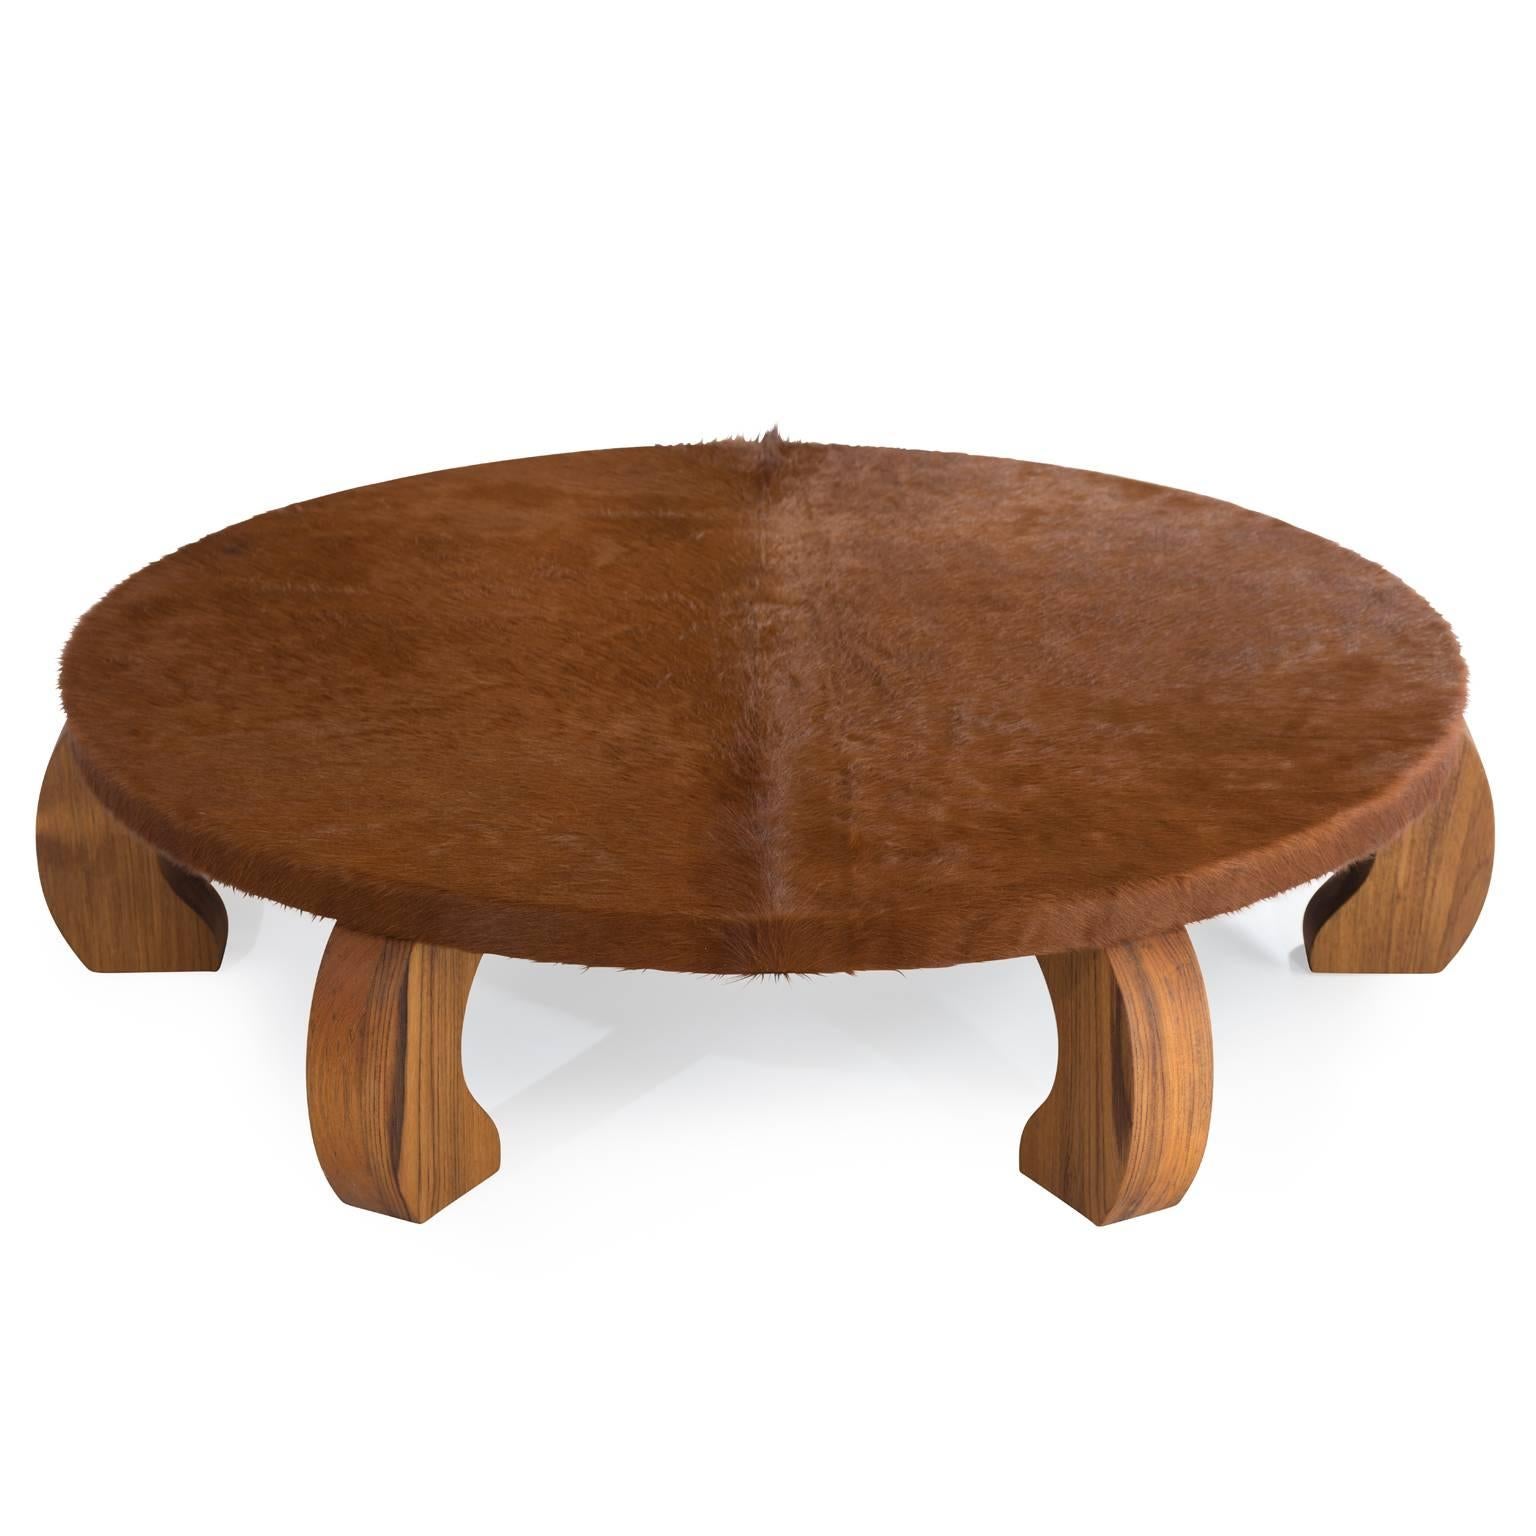 Crab coffee table by Michael Boyd for PLANEfurniture

PLANEfurniture emerges out of the idea that form should inspire; and these forms should function effortlessly. How does one suspend a body in air? Minimalism with character. Although there is